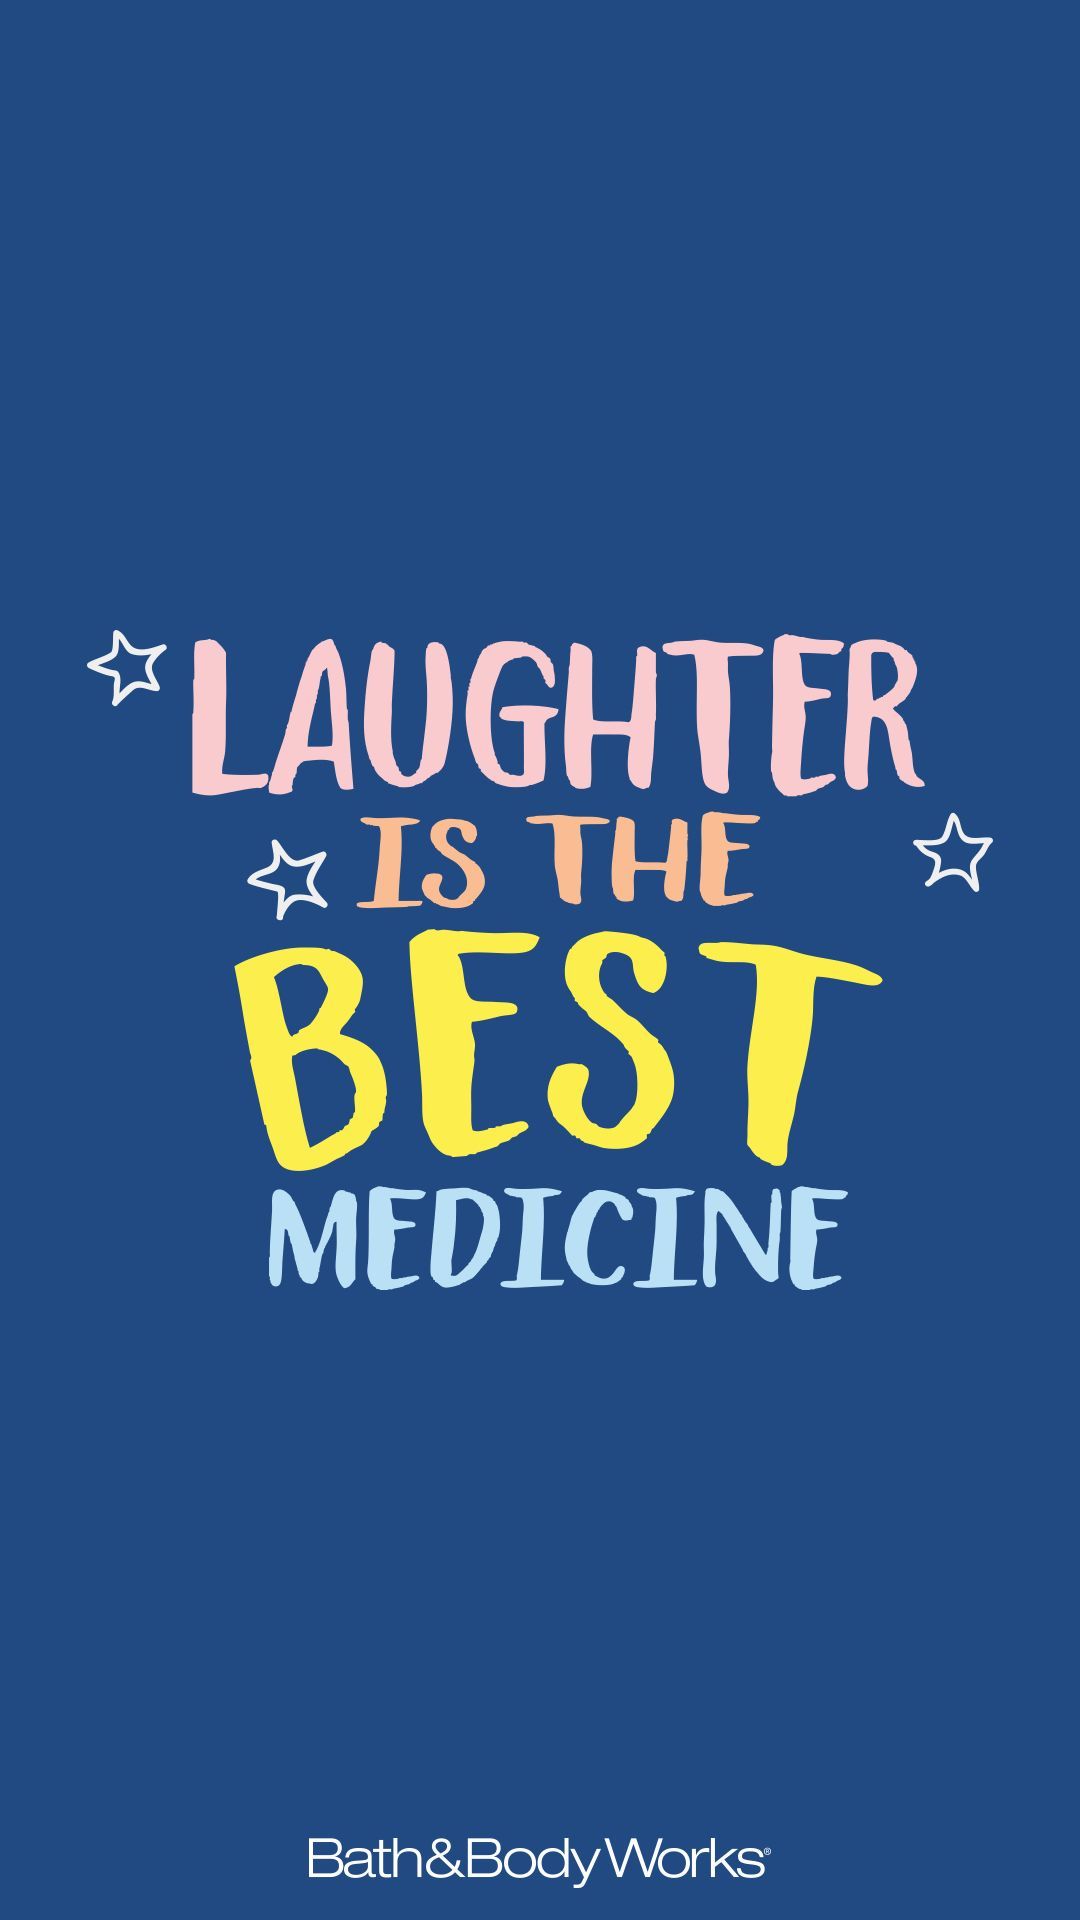 Laughter is the BEST Medicine Cell Phone Wallpaper Background